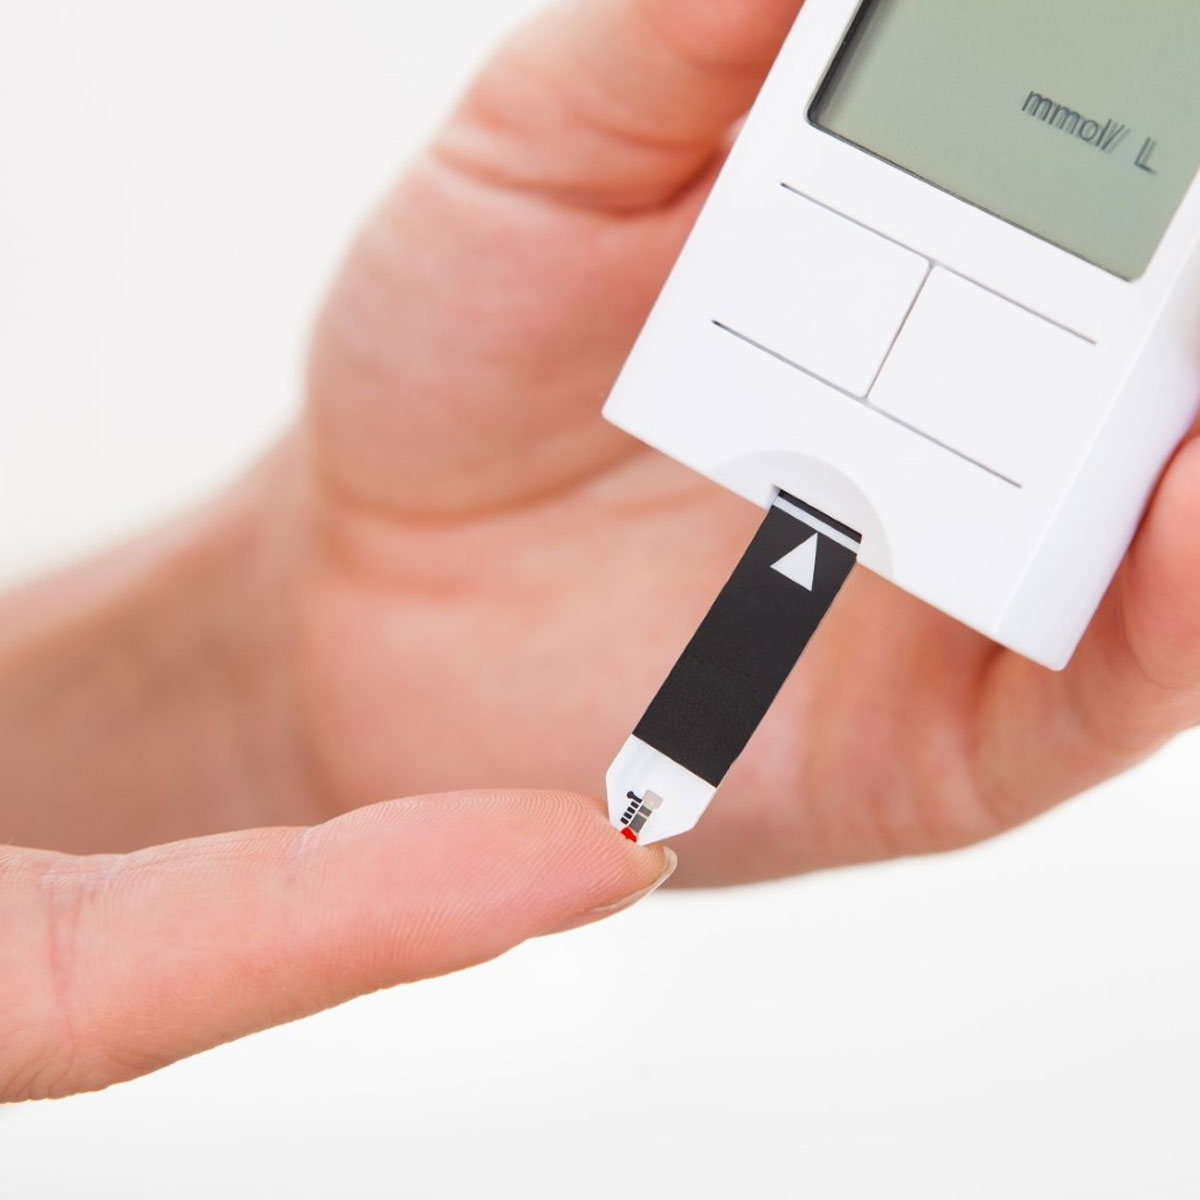 BLOOD SUGAR, DIABETES, HYPOGLYCEMIA – How to Lower Your Blood Sugar Naturally?